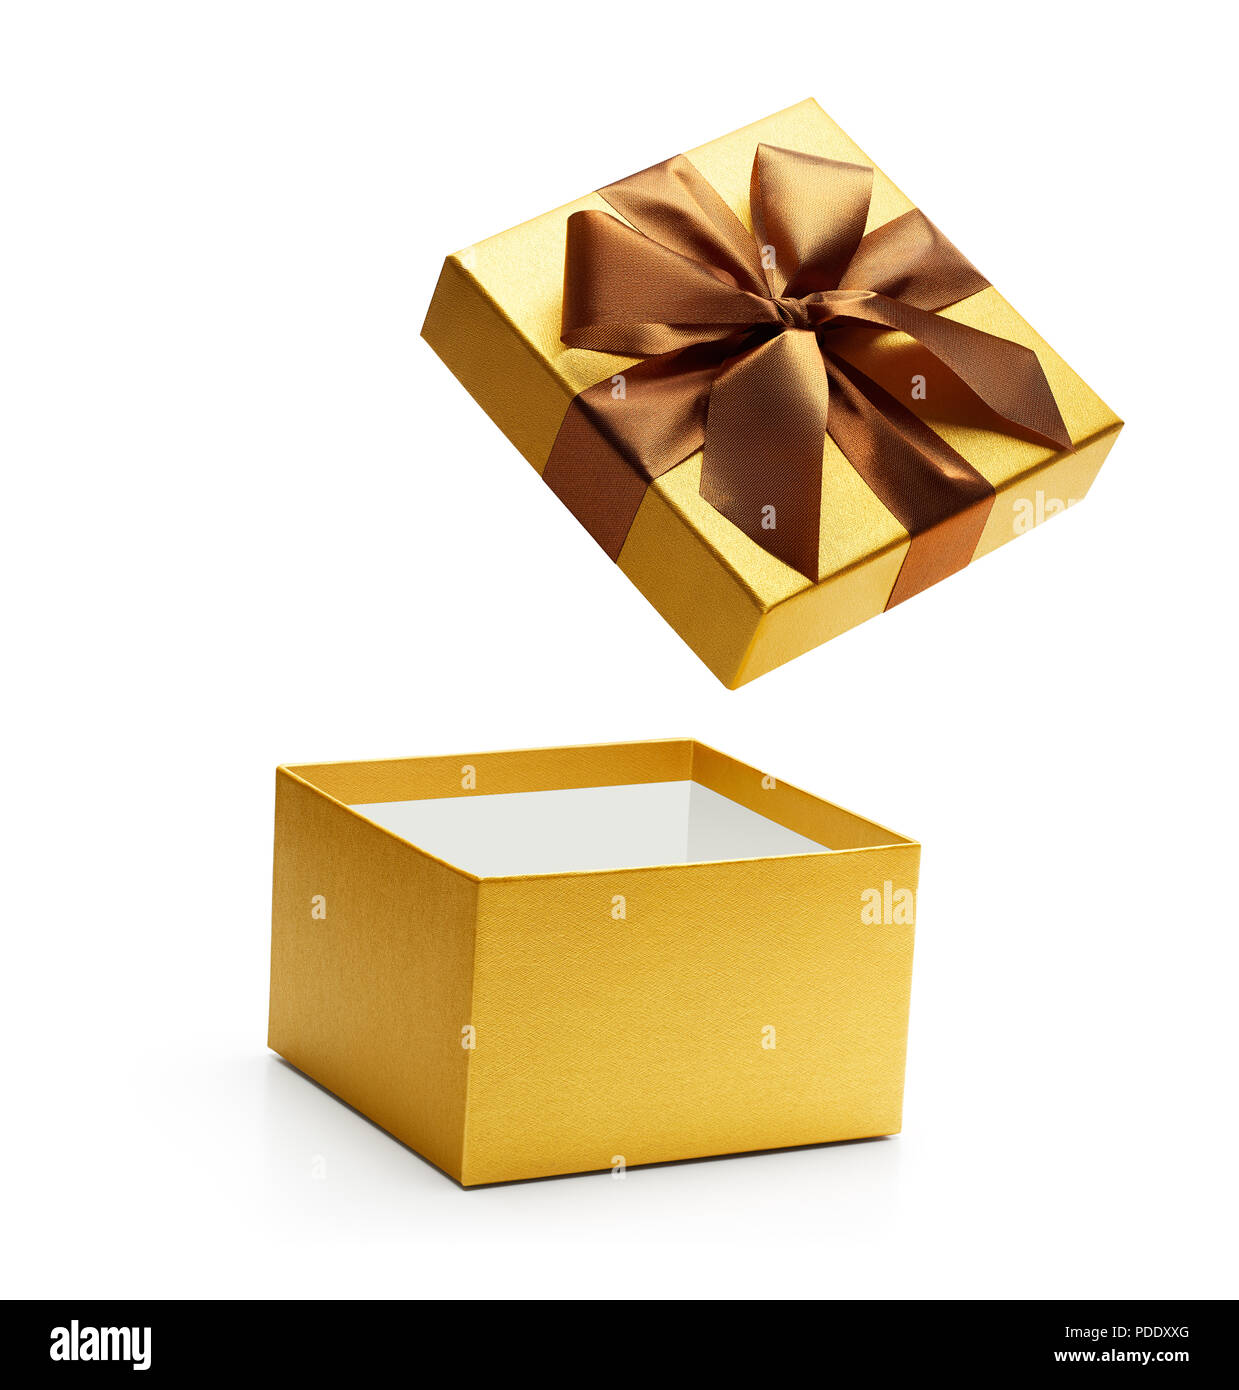 Gold open gift box isolated on white background Stock Photo